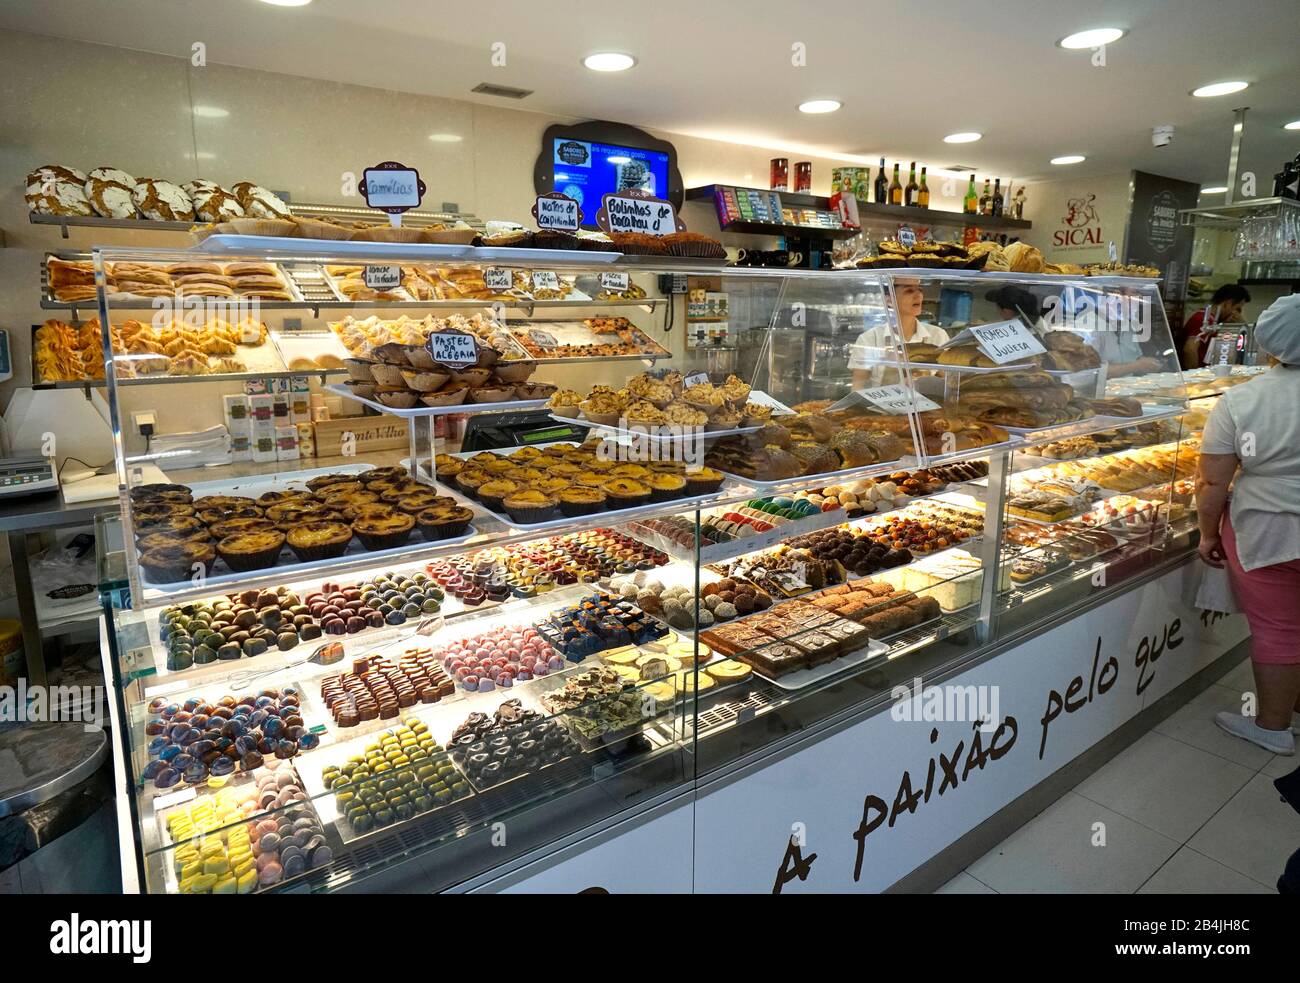 Page 2 - Inside Bakery Shop High Resolution Stock Photography and Images -  Alamy